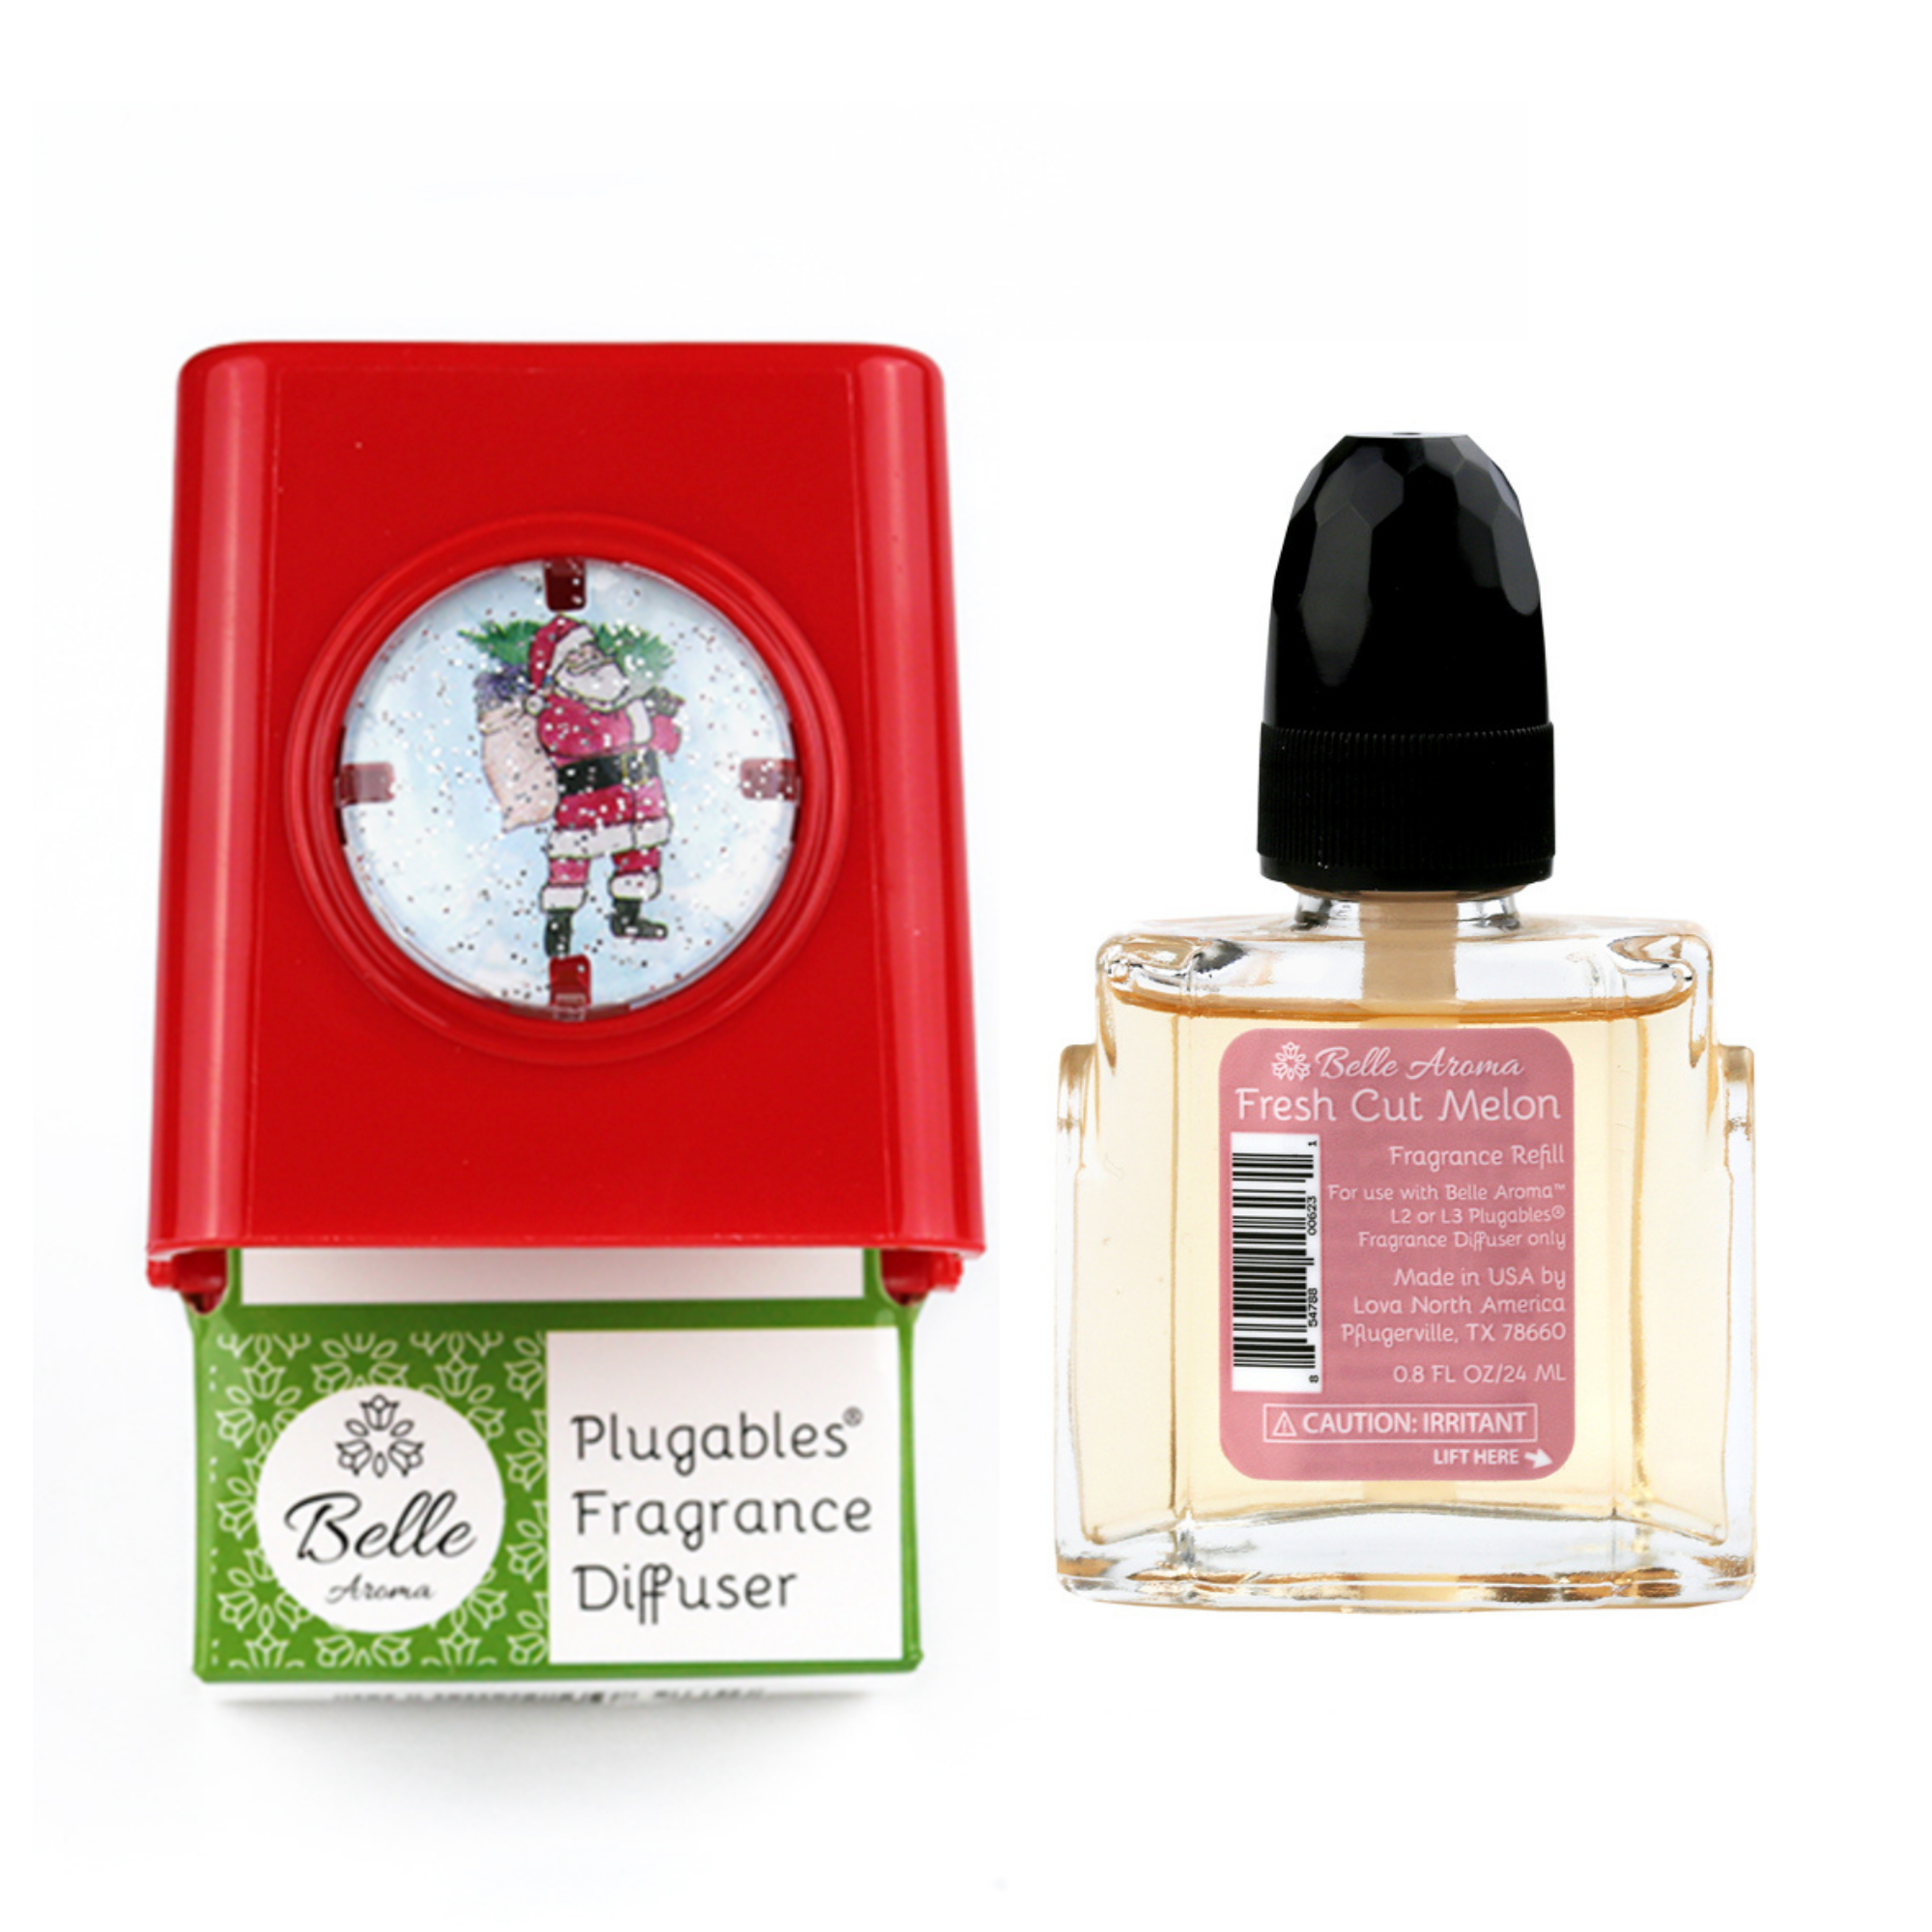 Glitter Domes™ Plugables® Aromalectric® Scented Oil Diffuser - Santa with Fresh Cut Melon Fragrance Oil Home Fragrance Accessories